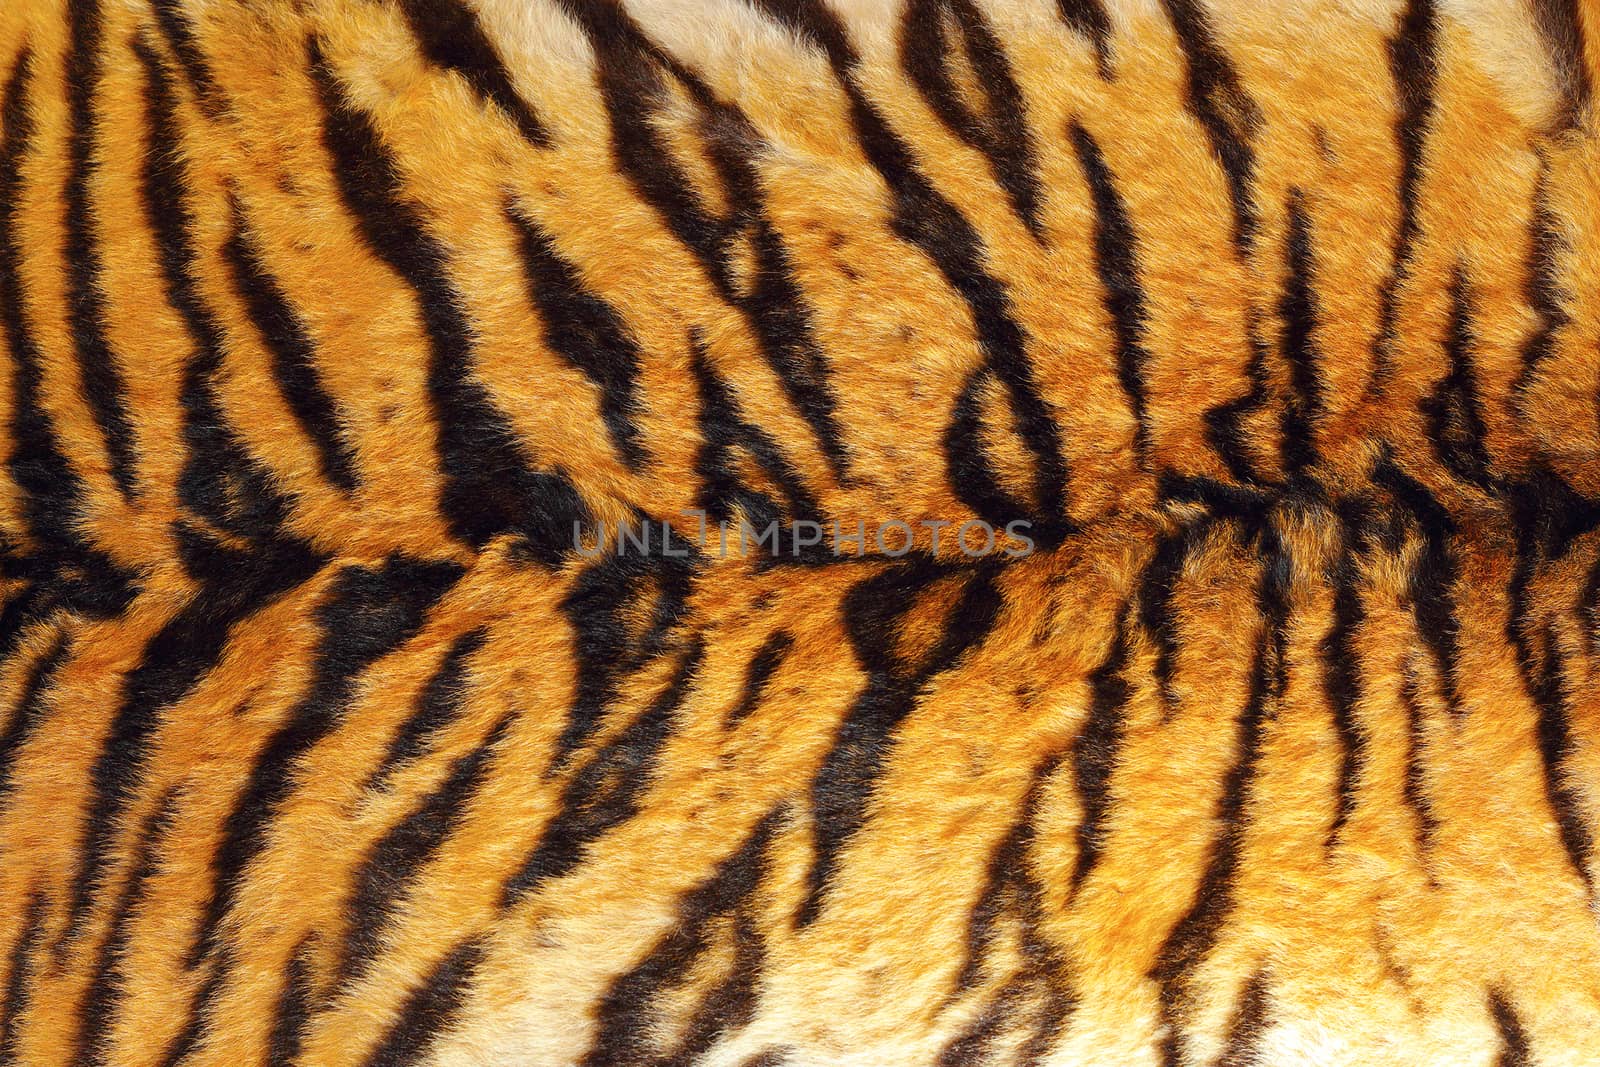 detail of tiger stripes on leather by taviphoto